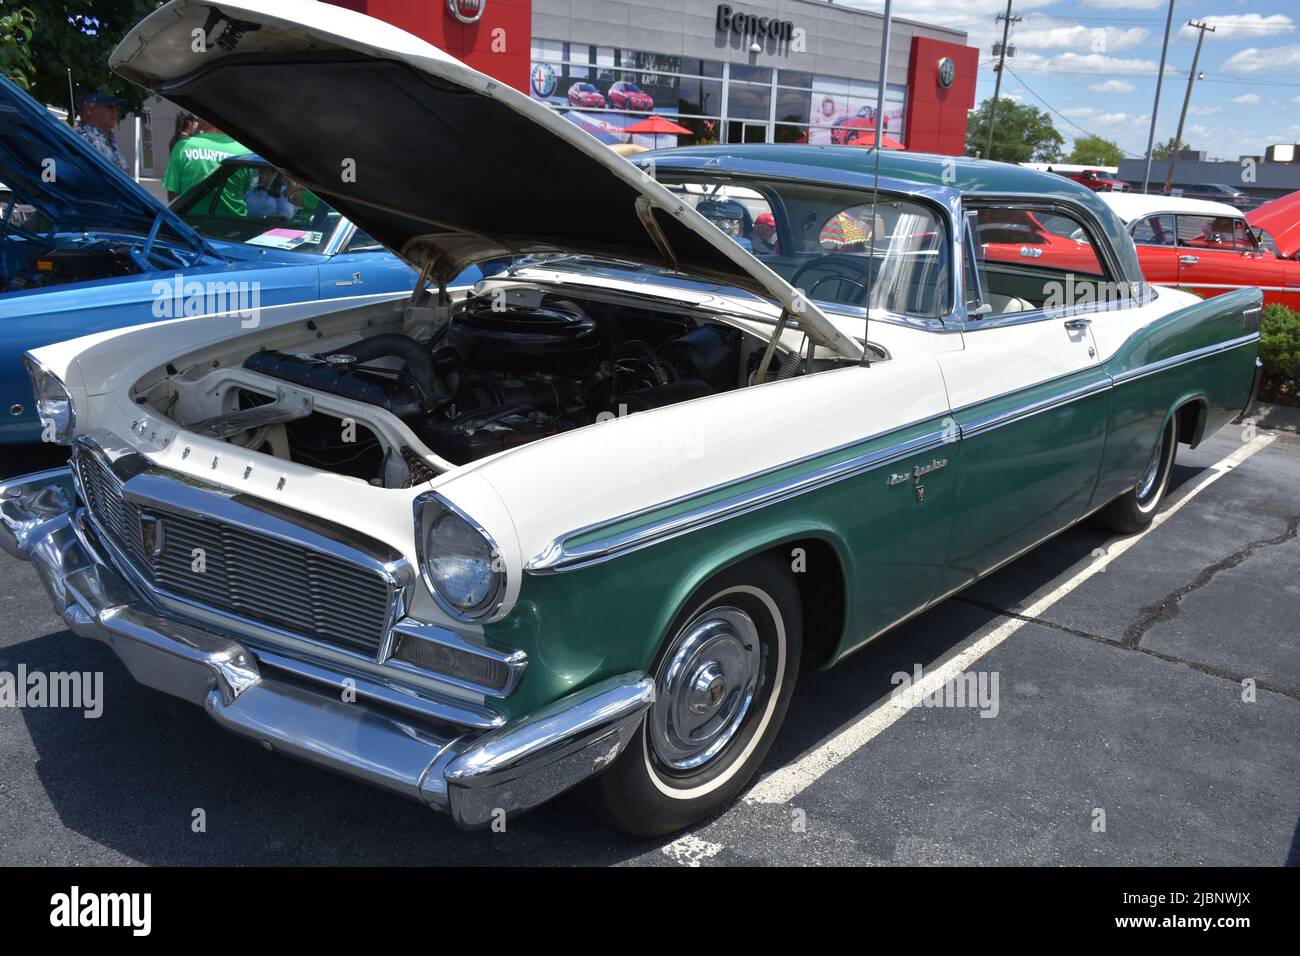 A 1966 Chrysler New Yorker on display at a car show. Stock Photo